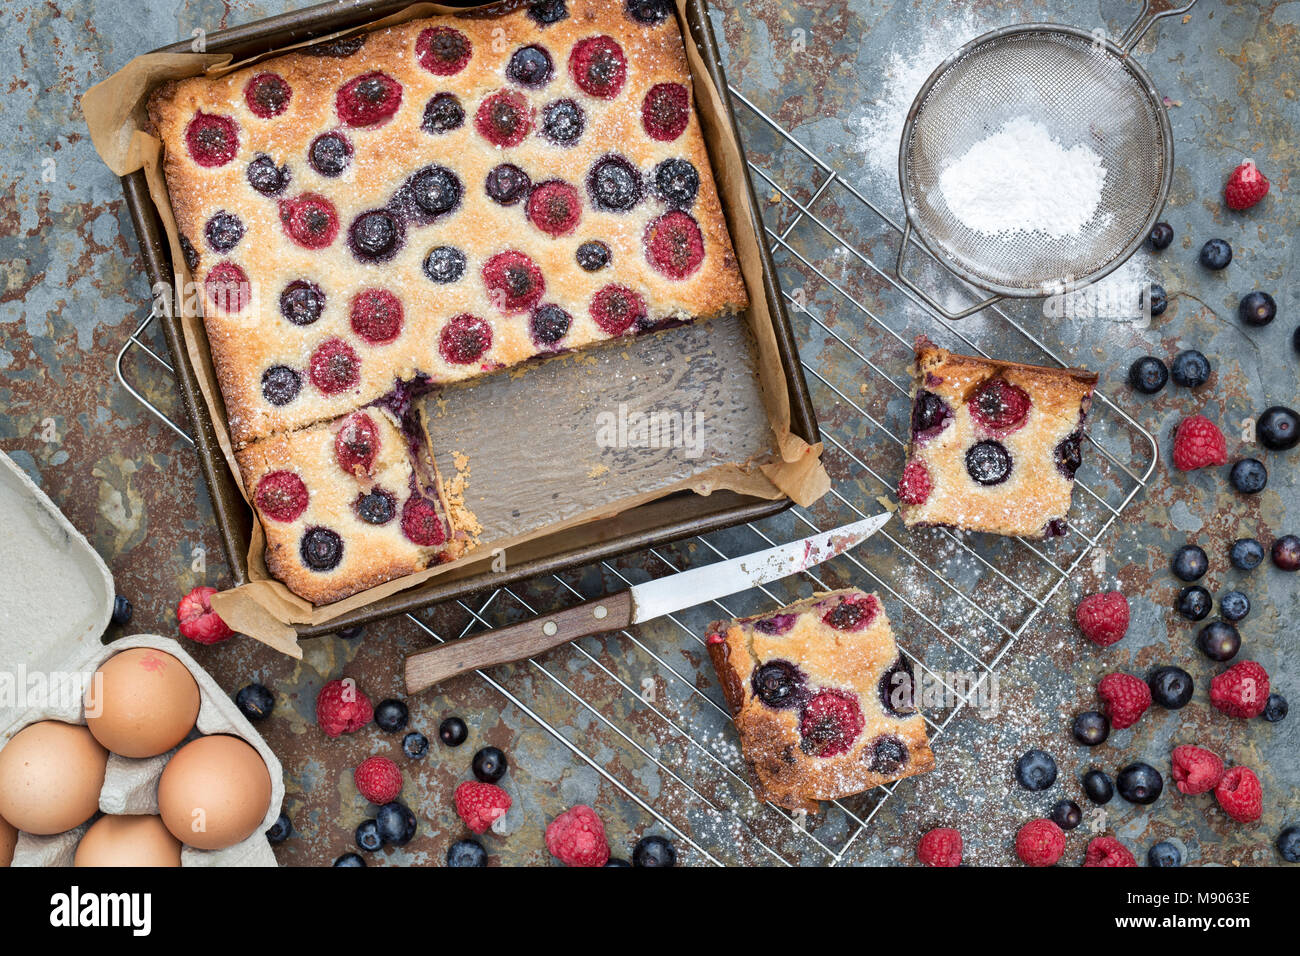 Homemade raspberry and blueberry frangipane tart with ingredients on a slate background Stock Photo